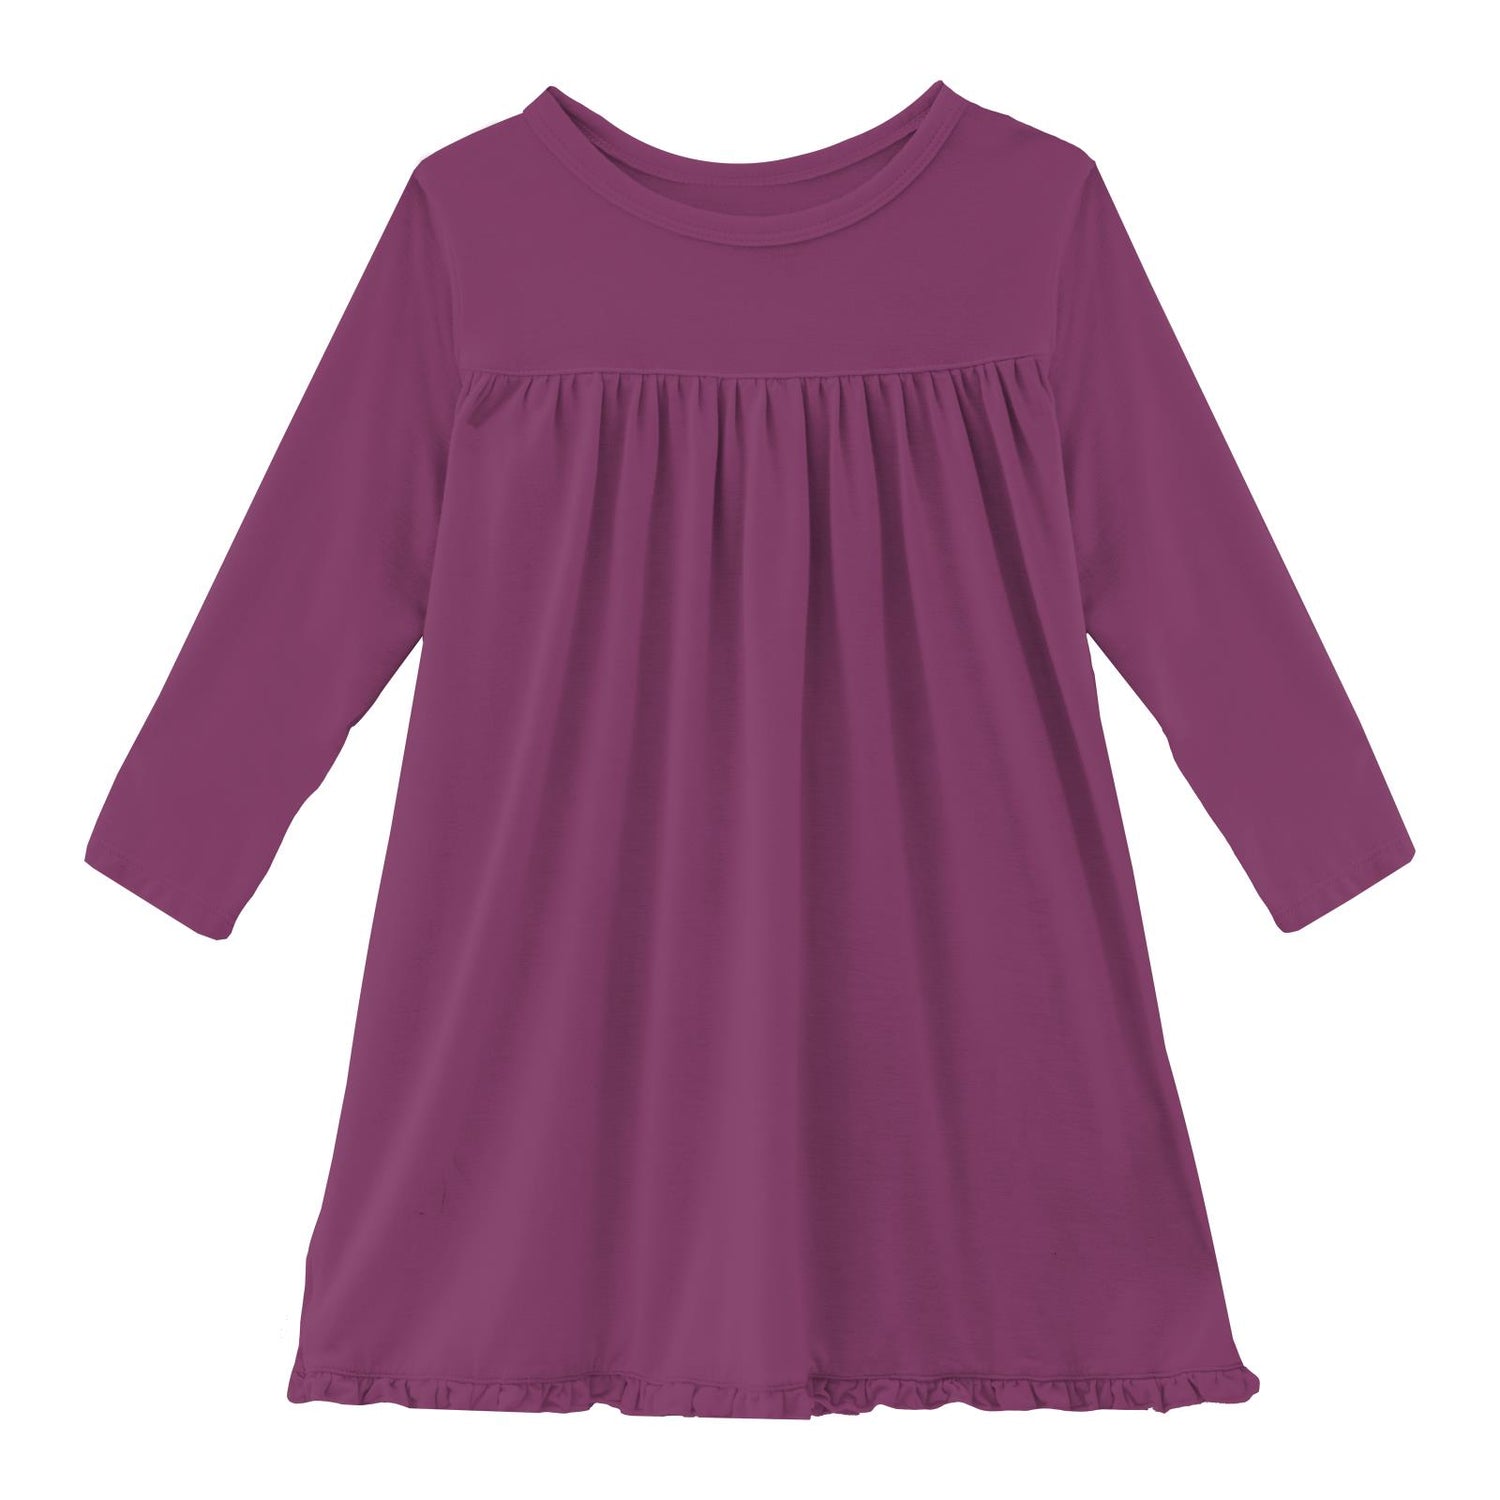 Classic Long Sleeve Swing Dress in Orchid